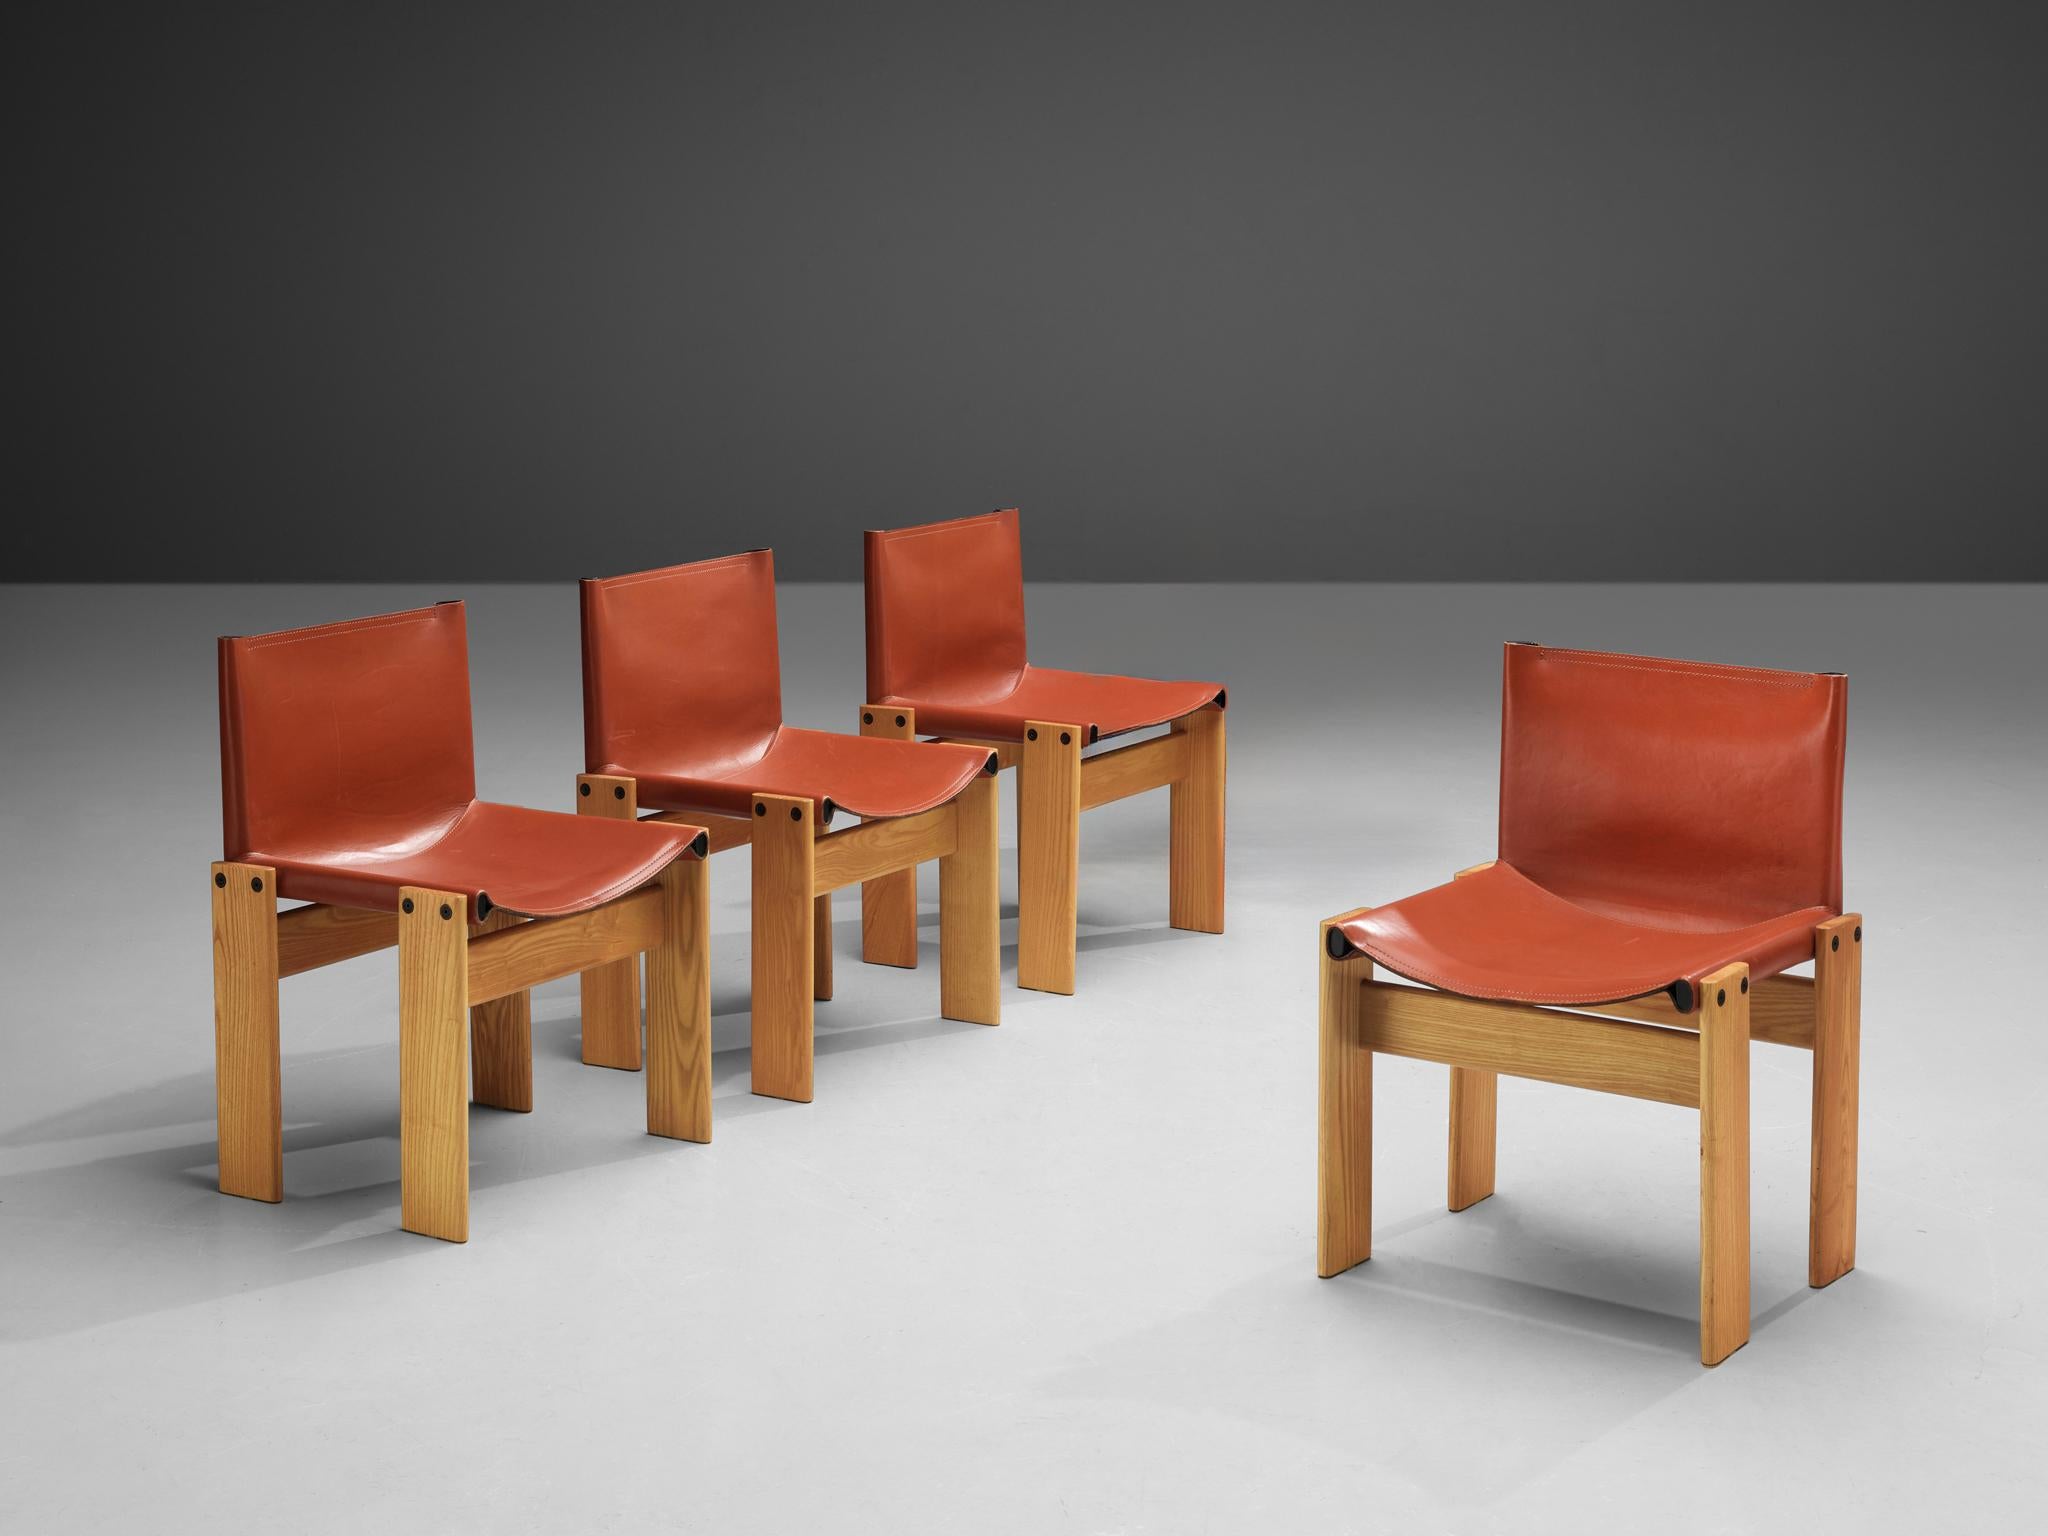 Afra & Tobia Scarpa for Molteni, set of four 'Monk' dining chairs, ash, leather, Italy, 1974.

Set of four 'Monk' chairs by Italian designers Afra & Tobia Scarpa. The red brown leather forms a striking combination with the blond ash wood.